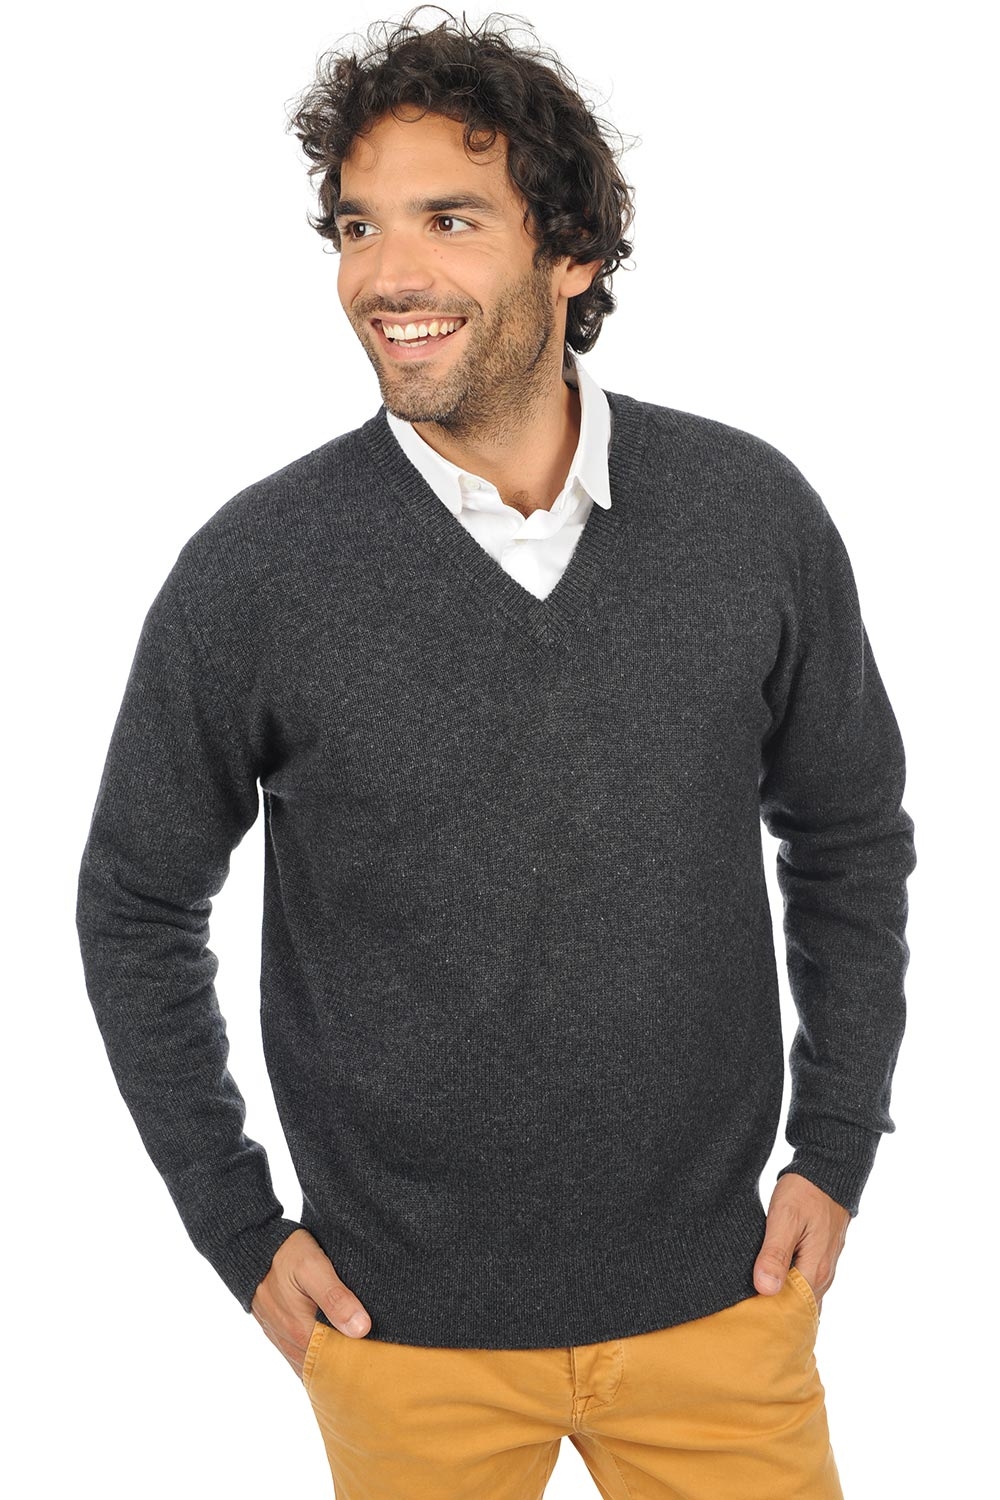 Cachemire pull homme hippolyte 4f anthracite chine 4xl